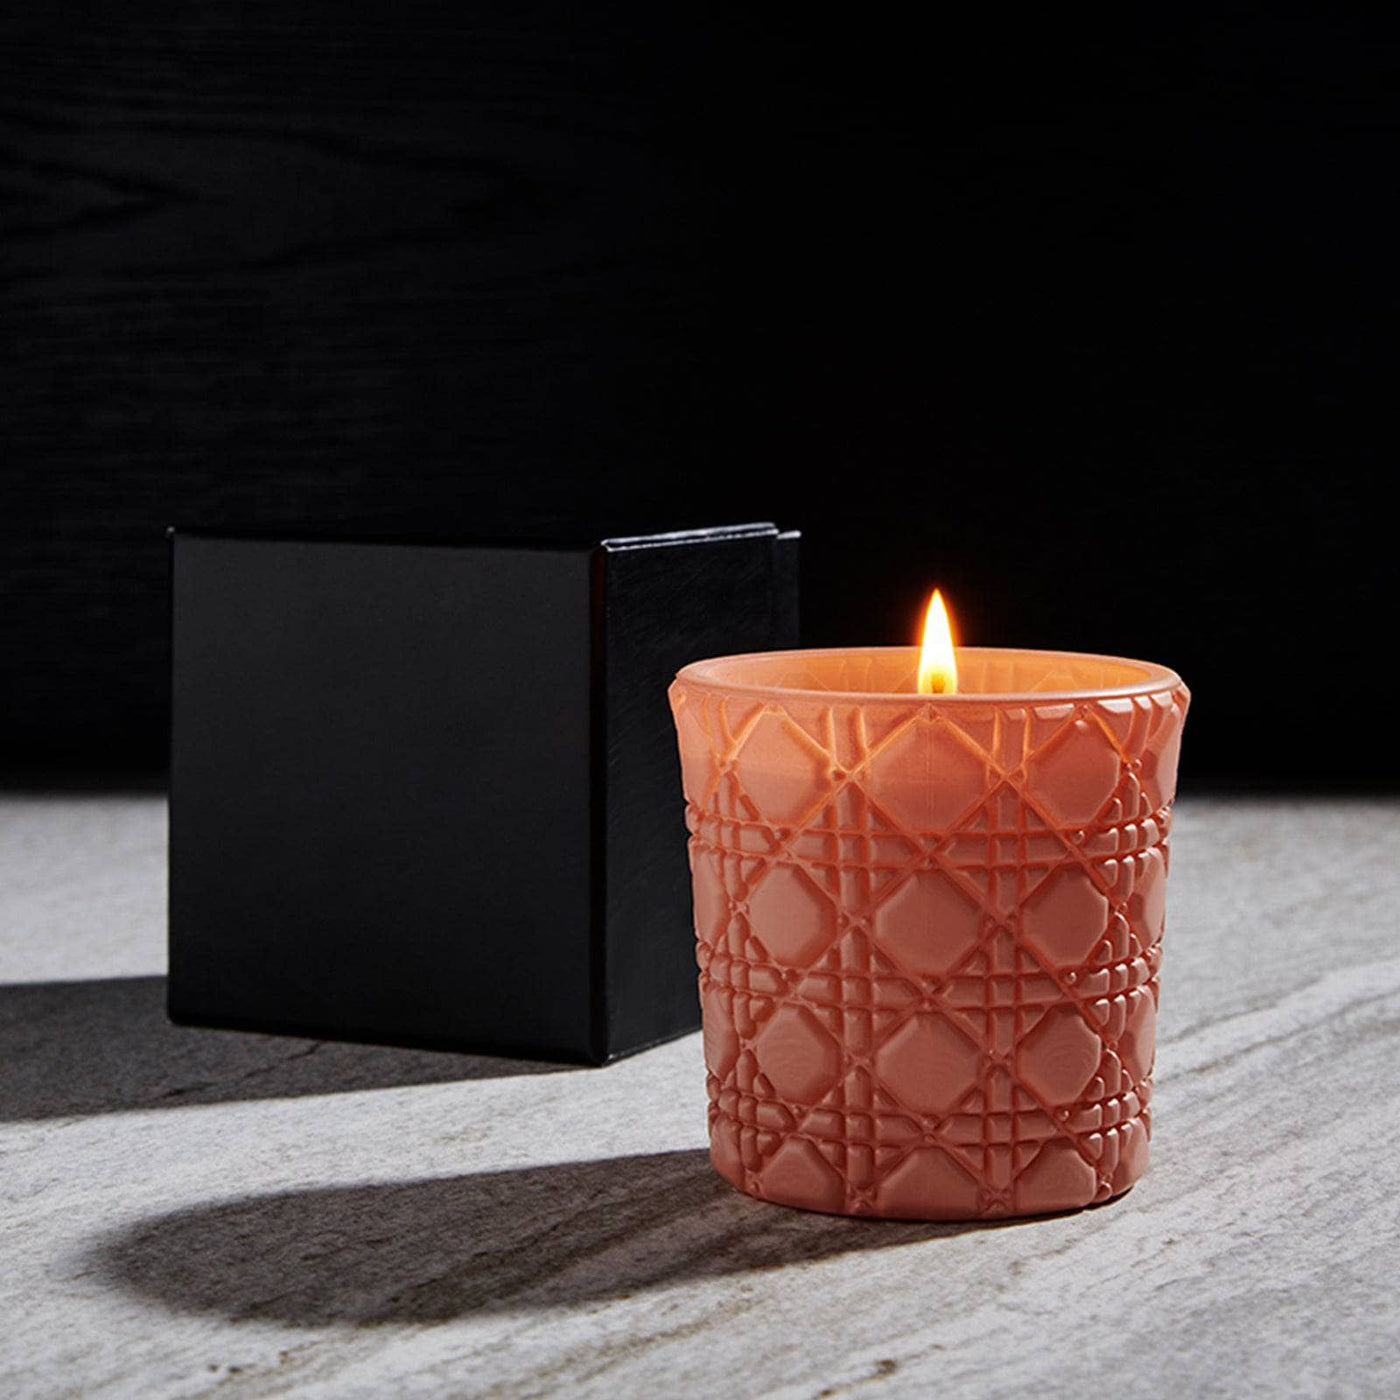 Re-energise Circular Soy Wax Candle, Pink, 145 g Candles sazy.com